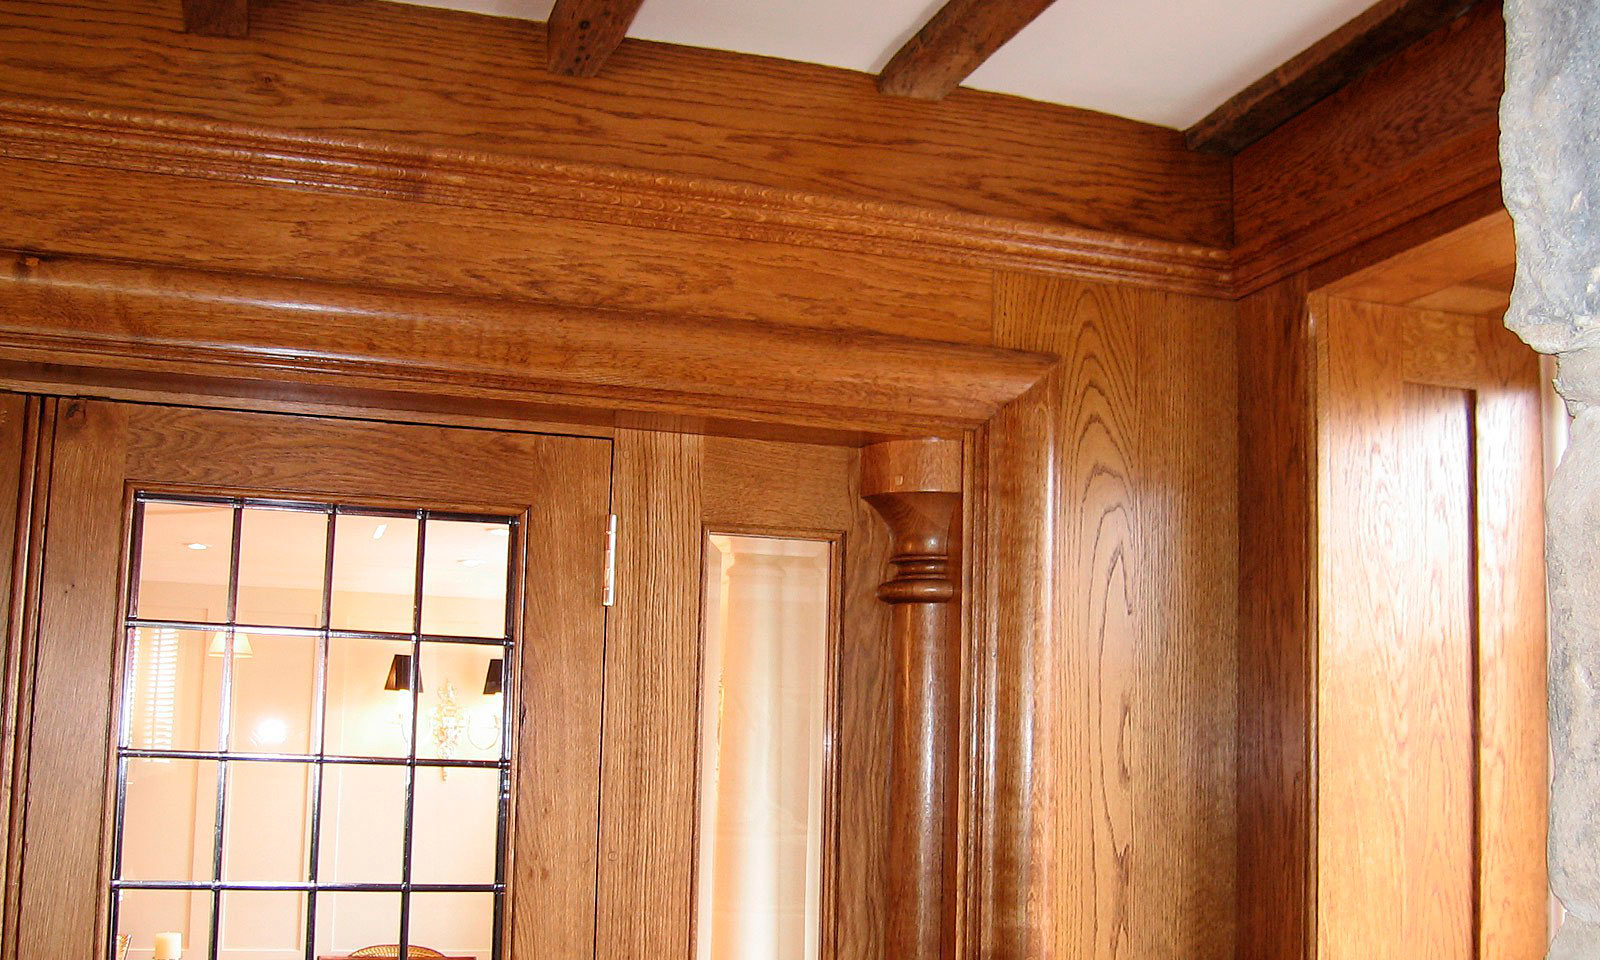 Oak panelled drawing room. Bespoke, custom made, traditional hardwood panelling, pediments, architraves and balusters, manufactured and installed by the skilled joiners at Mounts Hill Woodcraft.